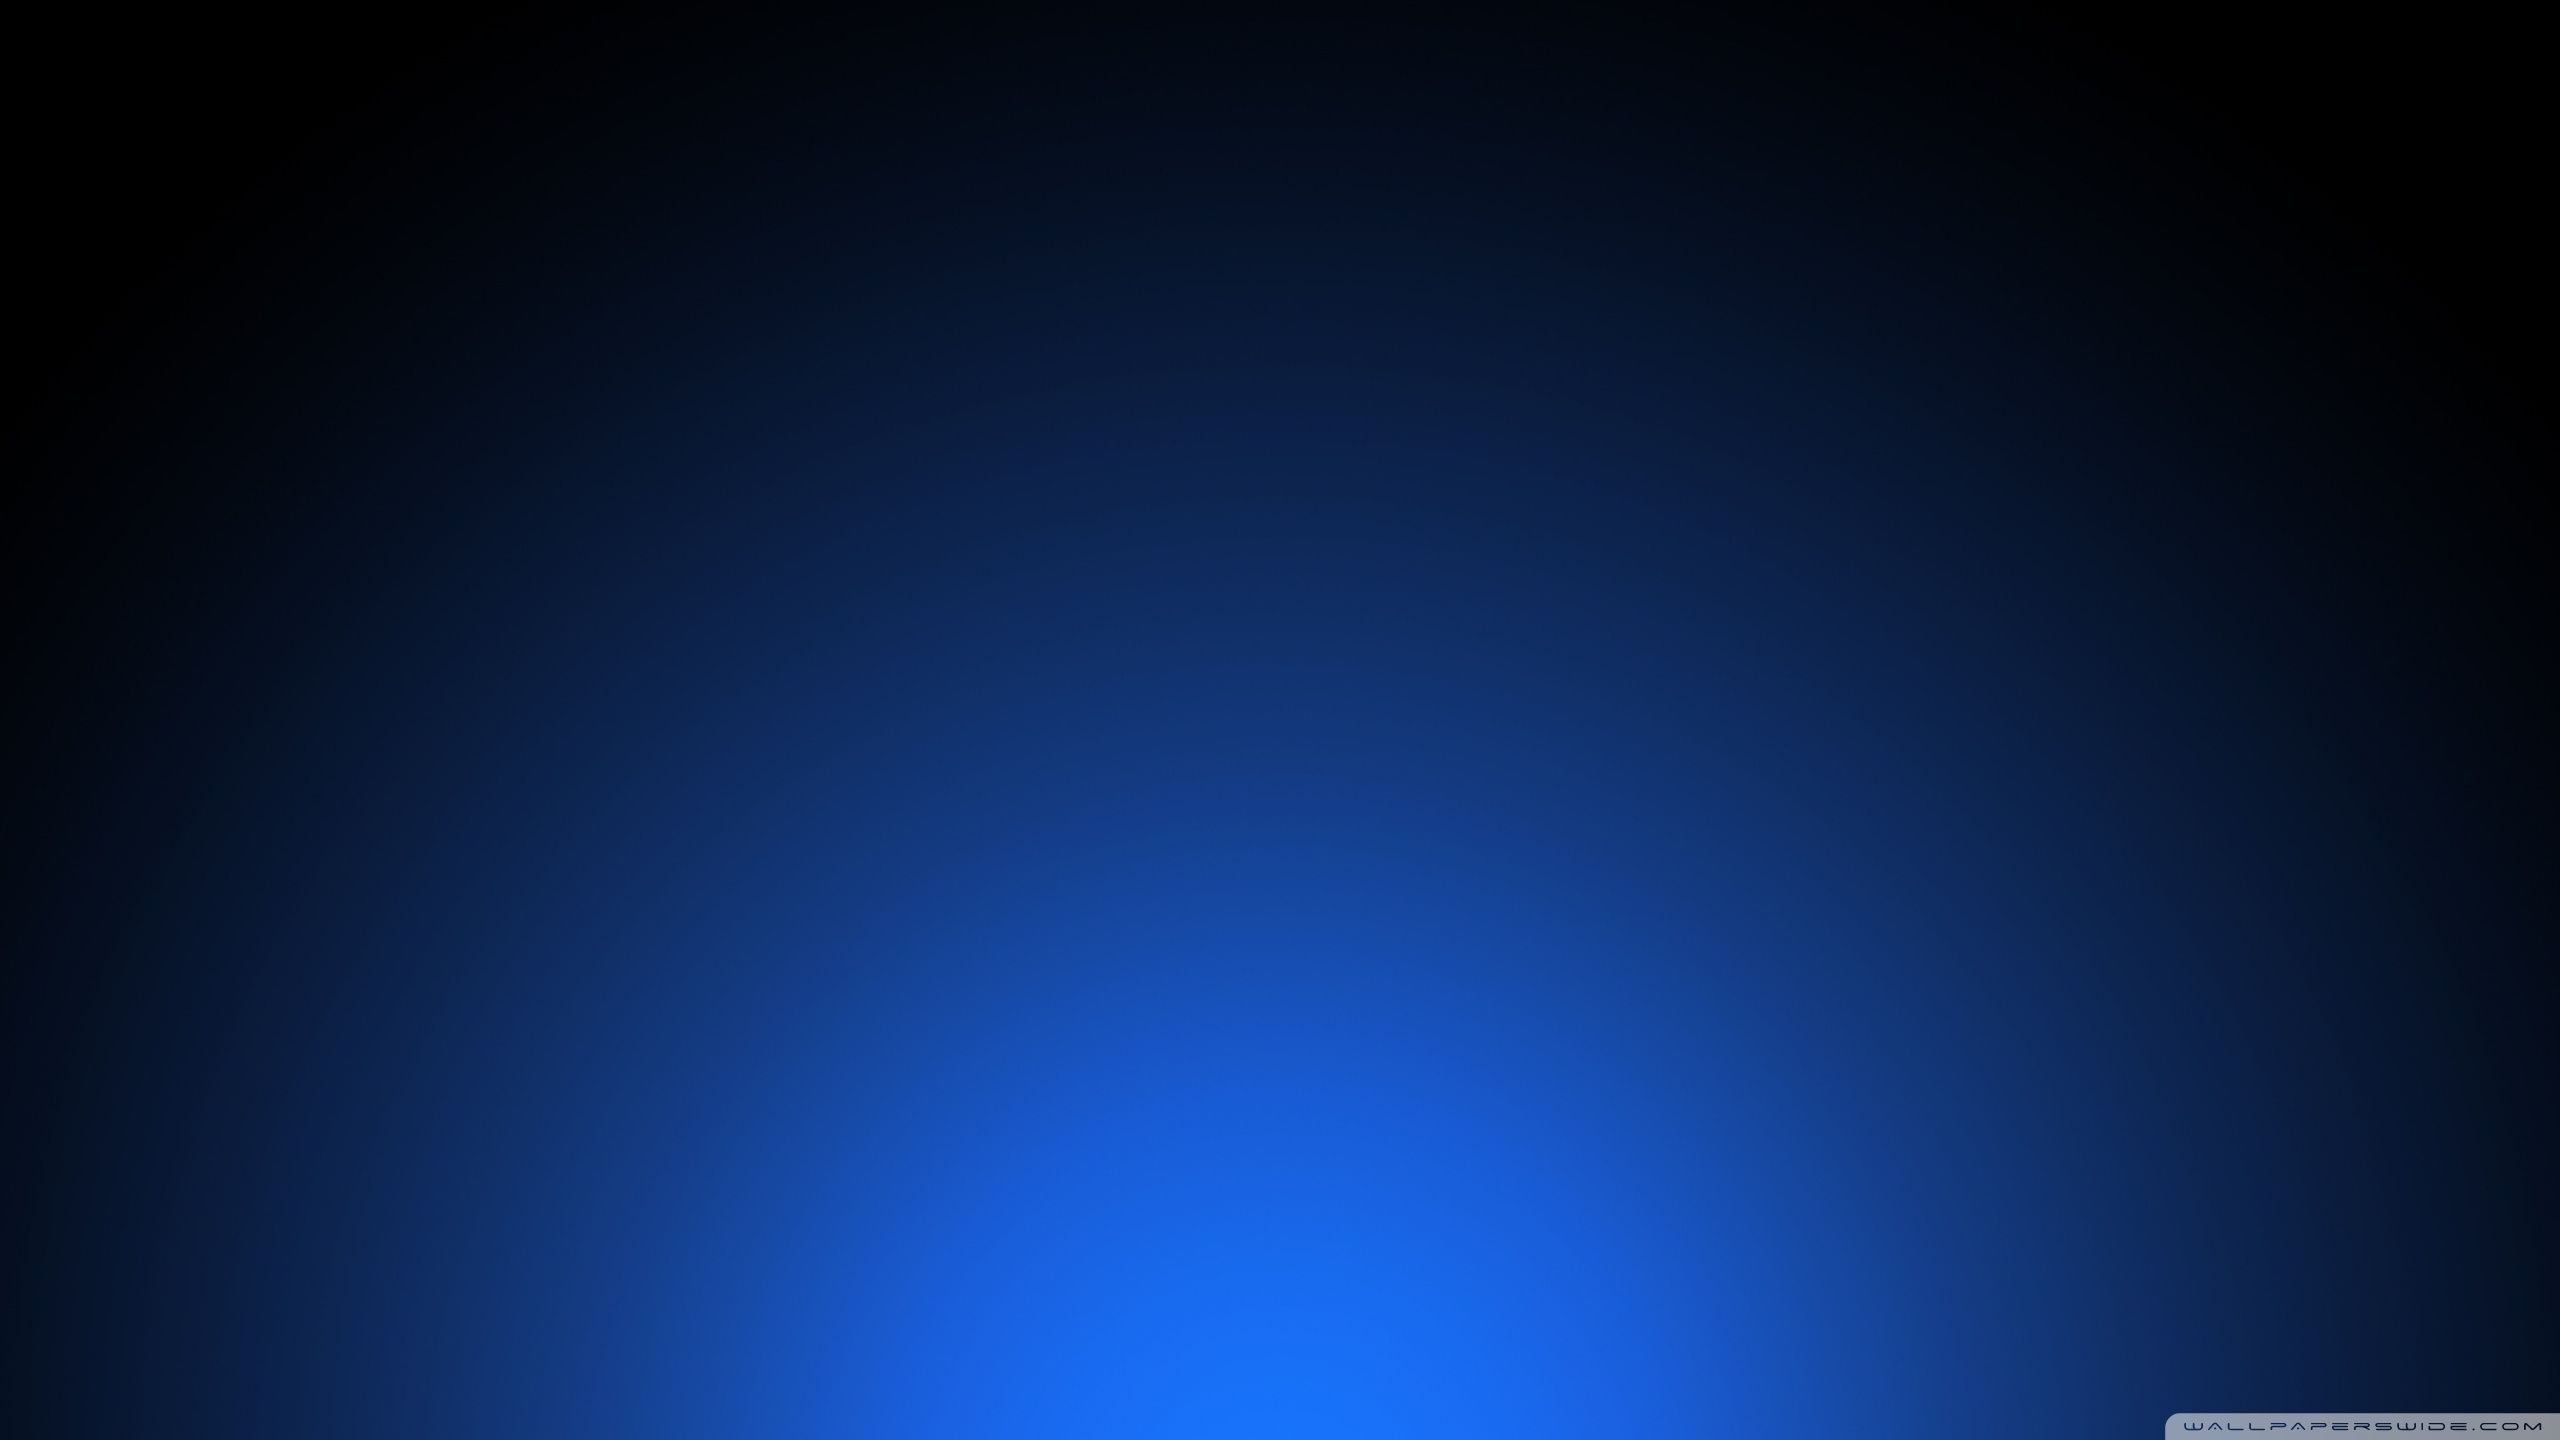 10 New Blue And Black Background FULL HD 1080p For PC Background 2020